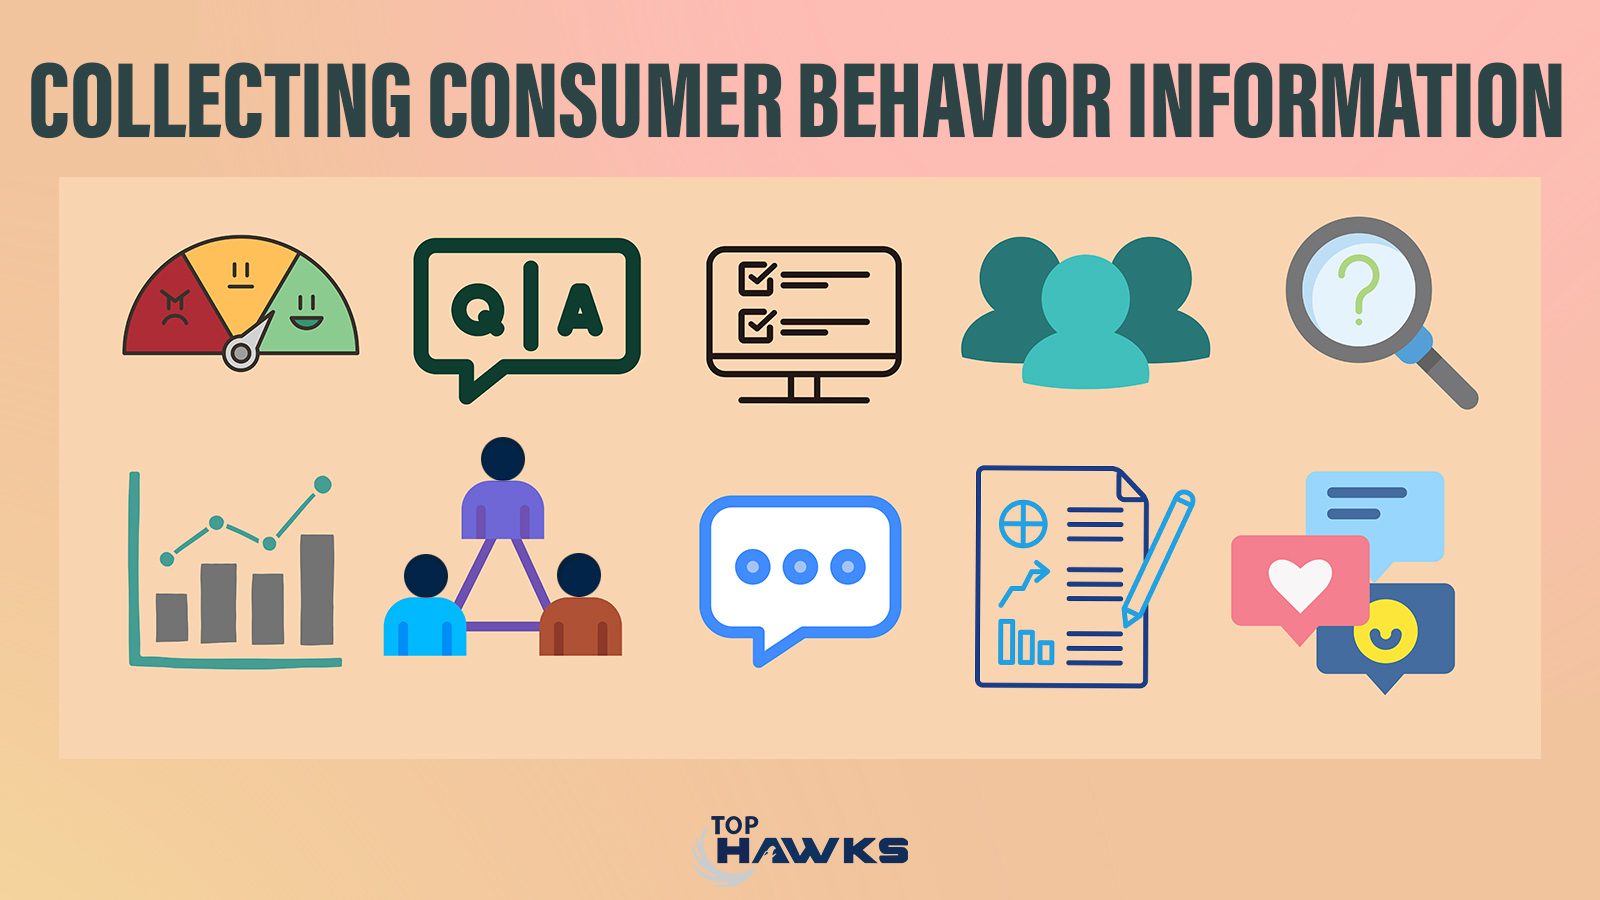 Image depicting Collecting different Consumer Behavior information